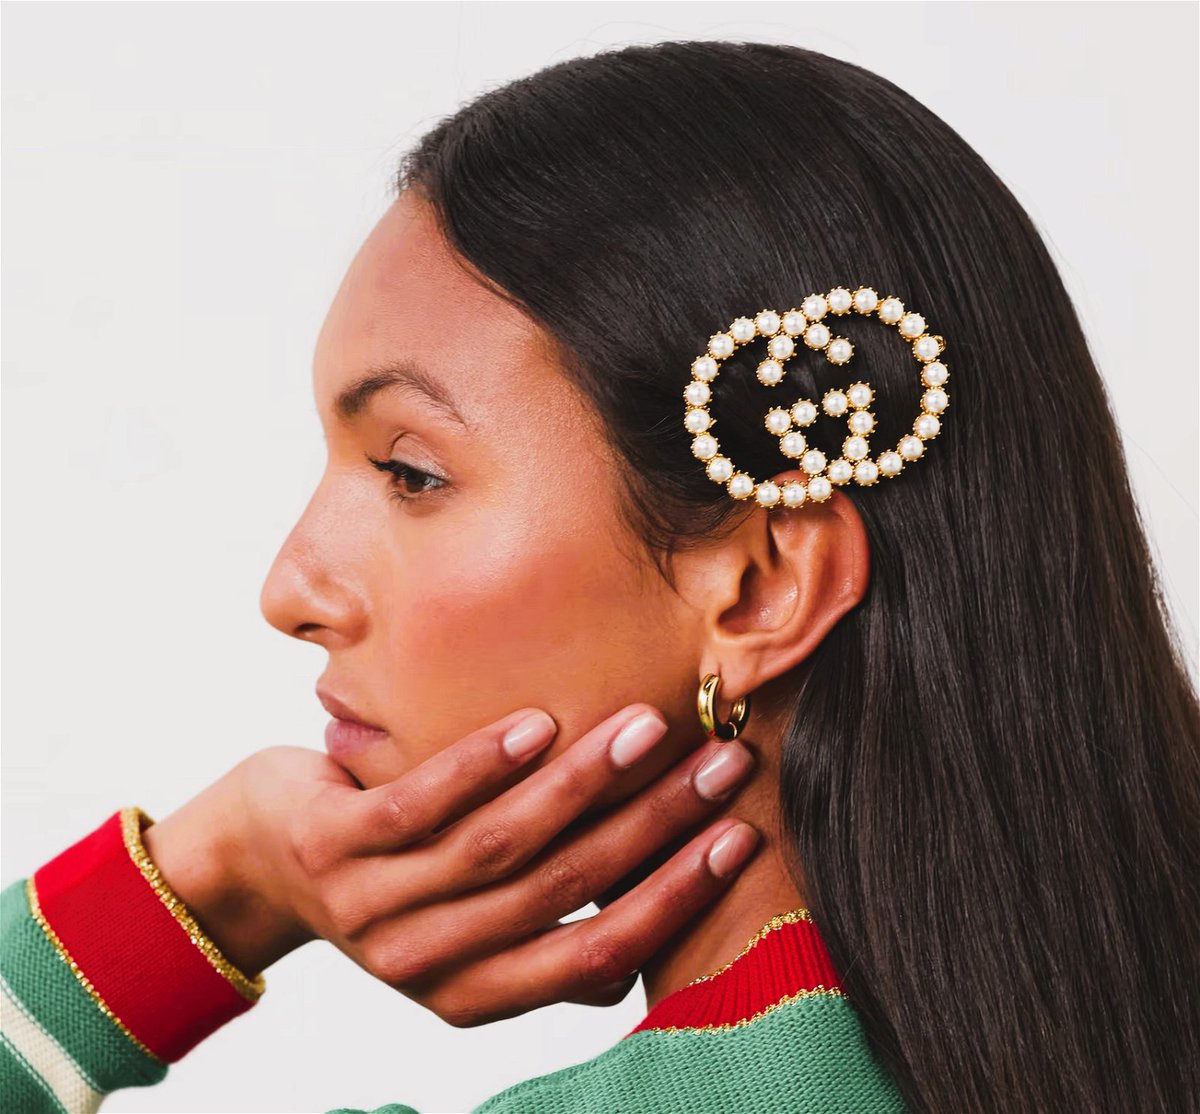 Gucci Elegance Unveiled: The Hair Clip by Alessandro Michele – A Fusion of Legacy and Luxury! 
#GGHairClip #GucciGlamour #PearlElegance #AlessandroMicheleStyle #IconicHairAccessories #LuxuryLocks #shopping #finejewelry #jewelleryaddict #HeadJewelry